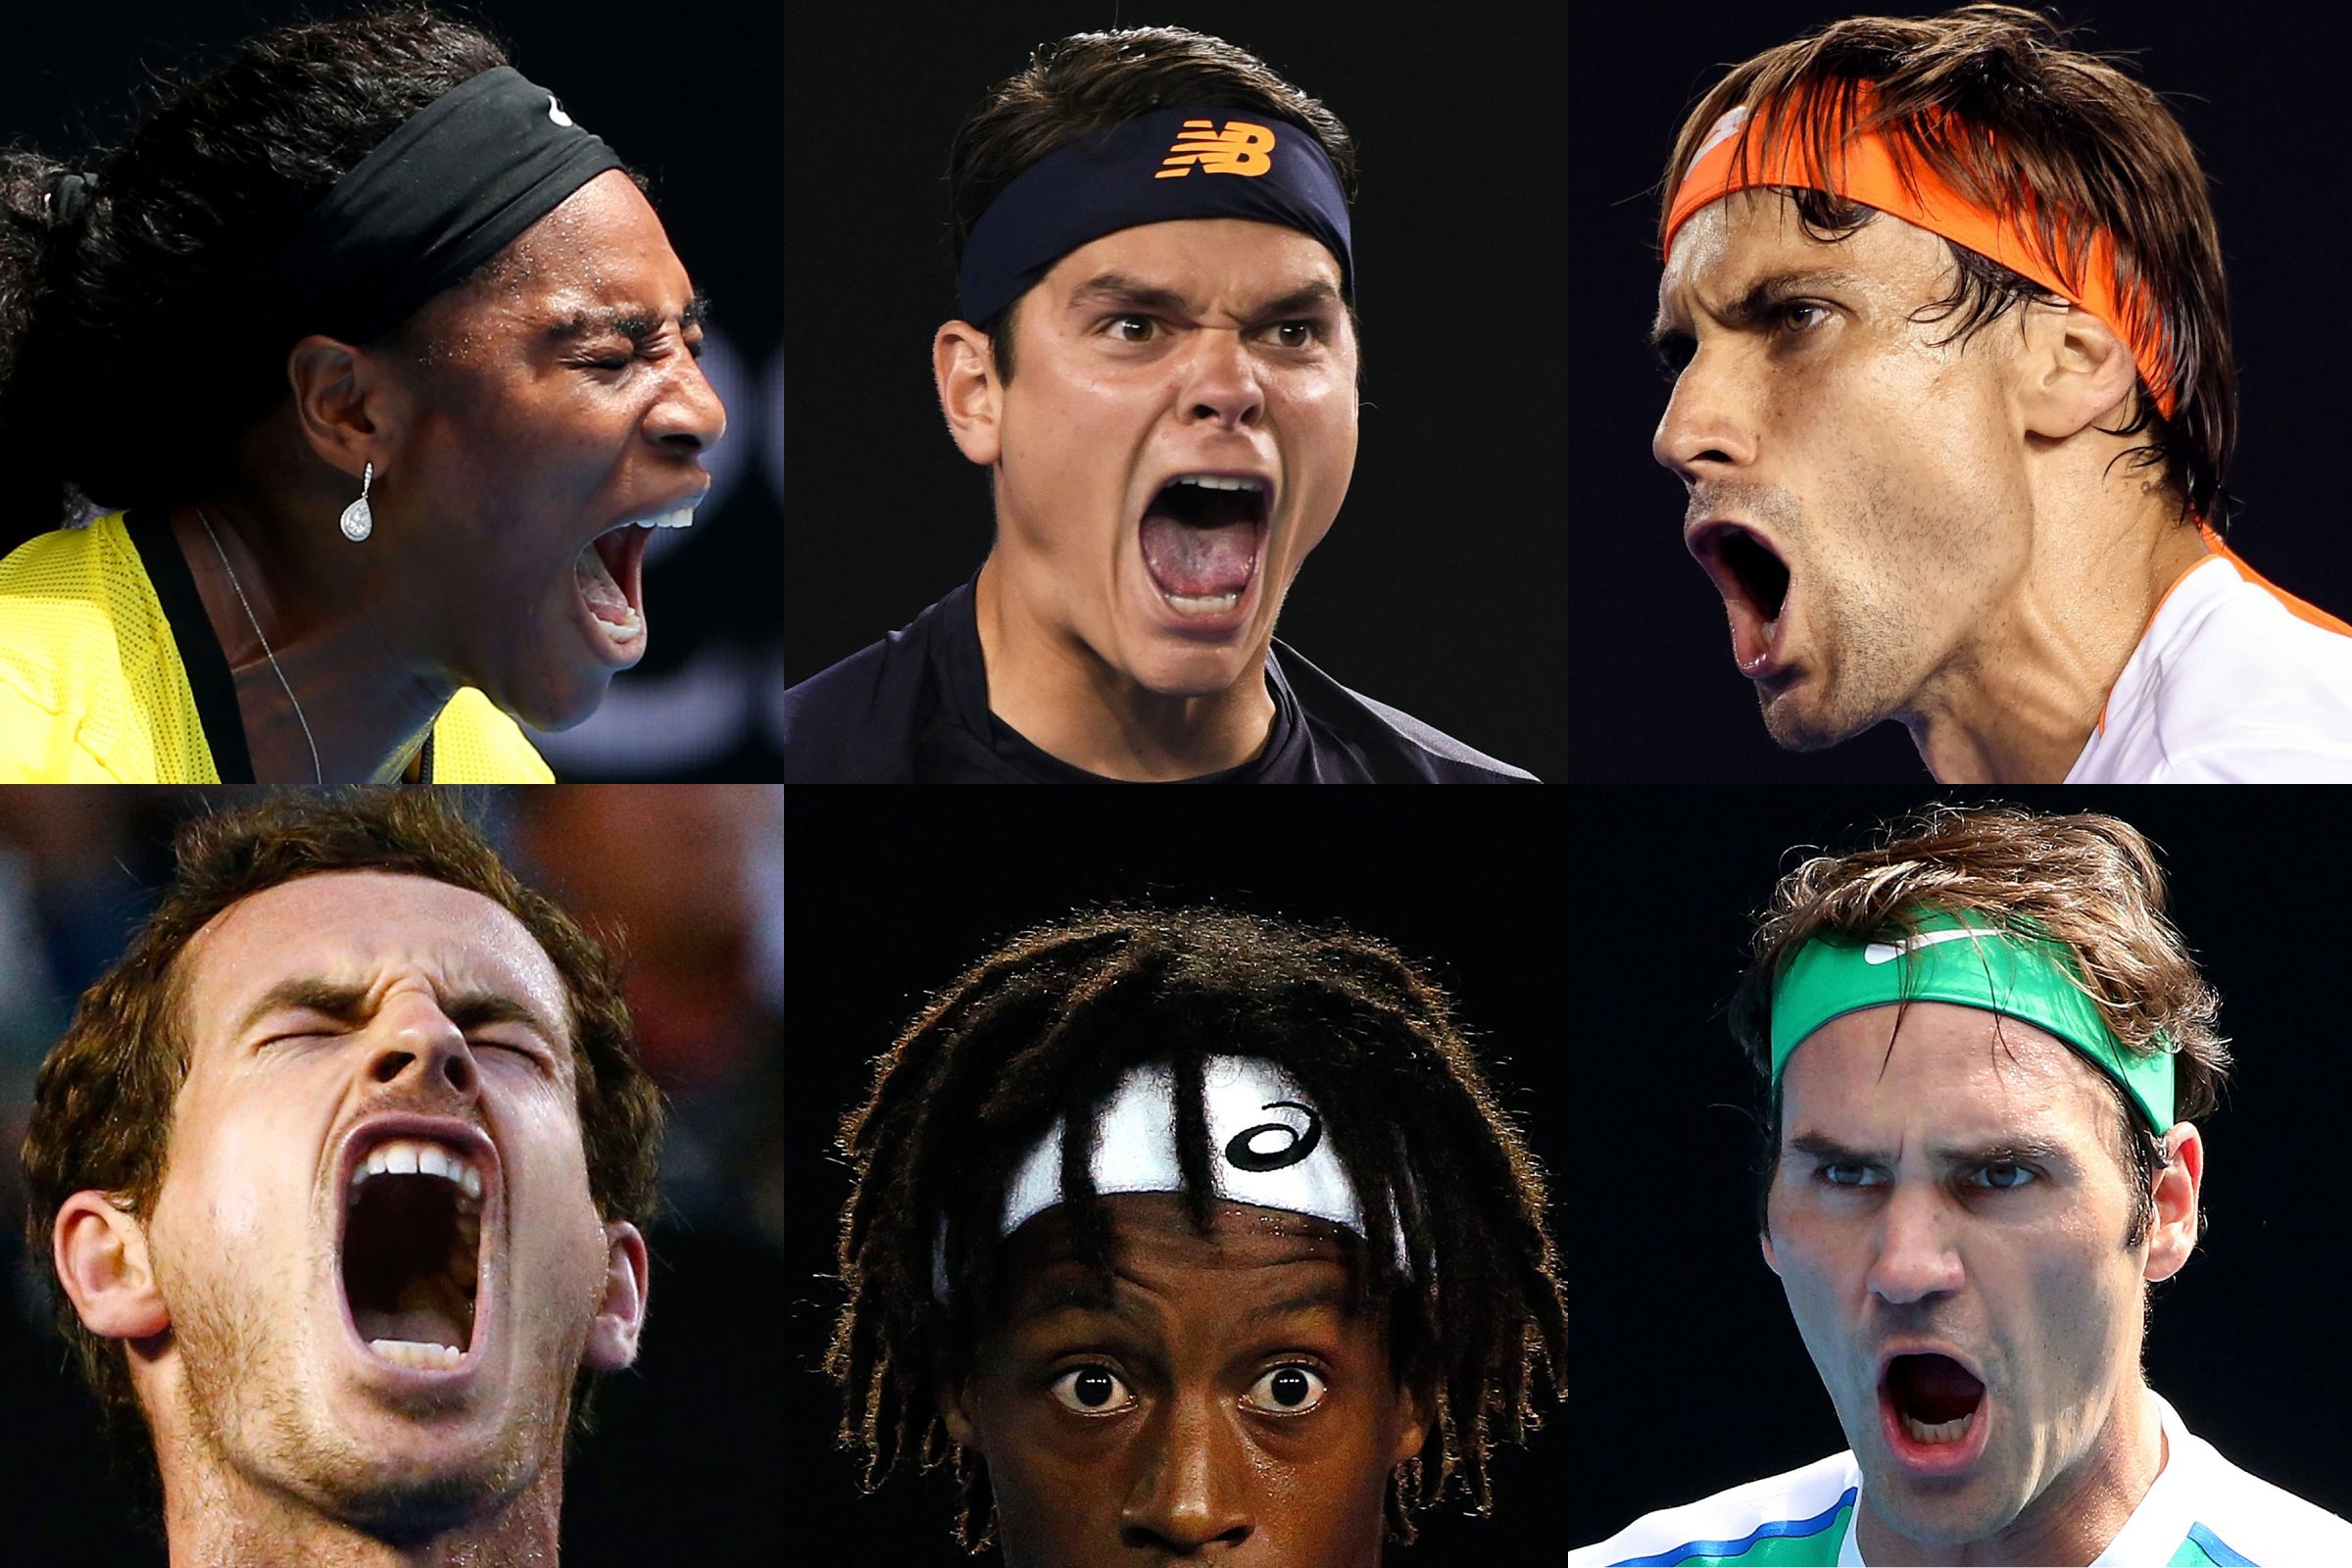 The most intense faces of the 2016 Australian Open tennis tournament.